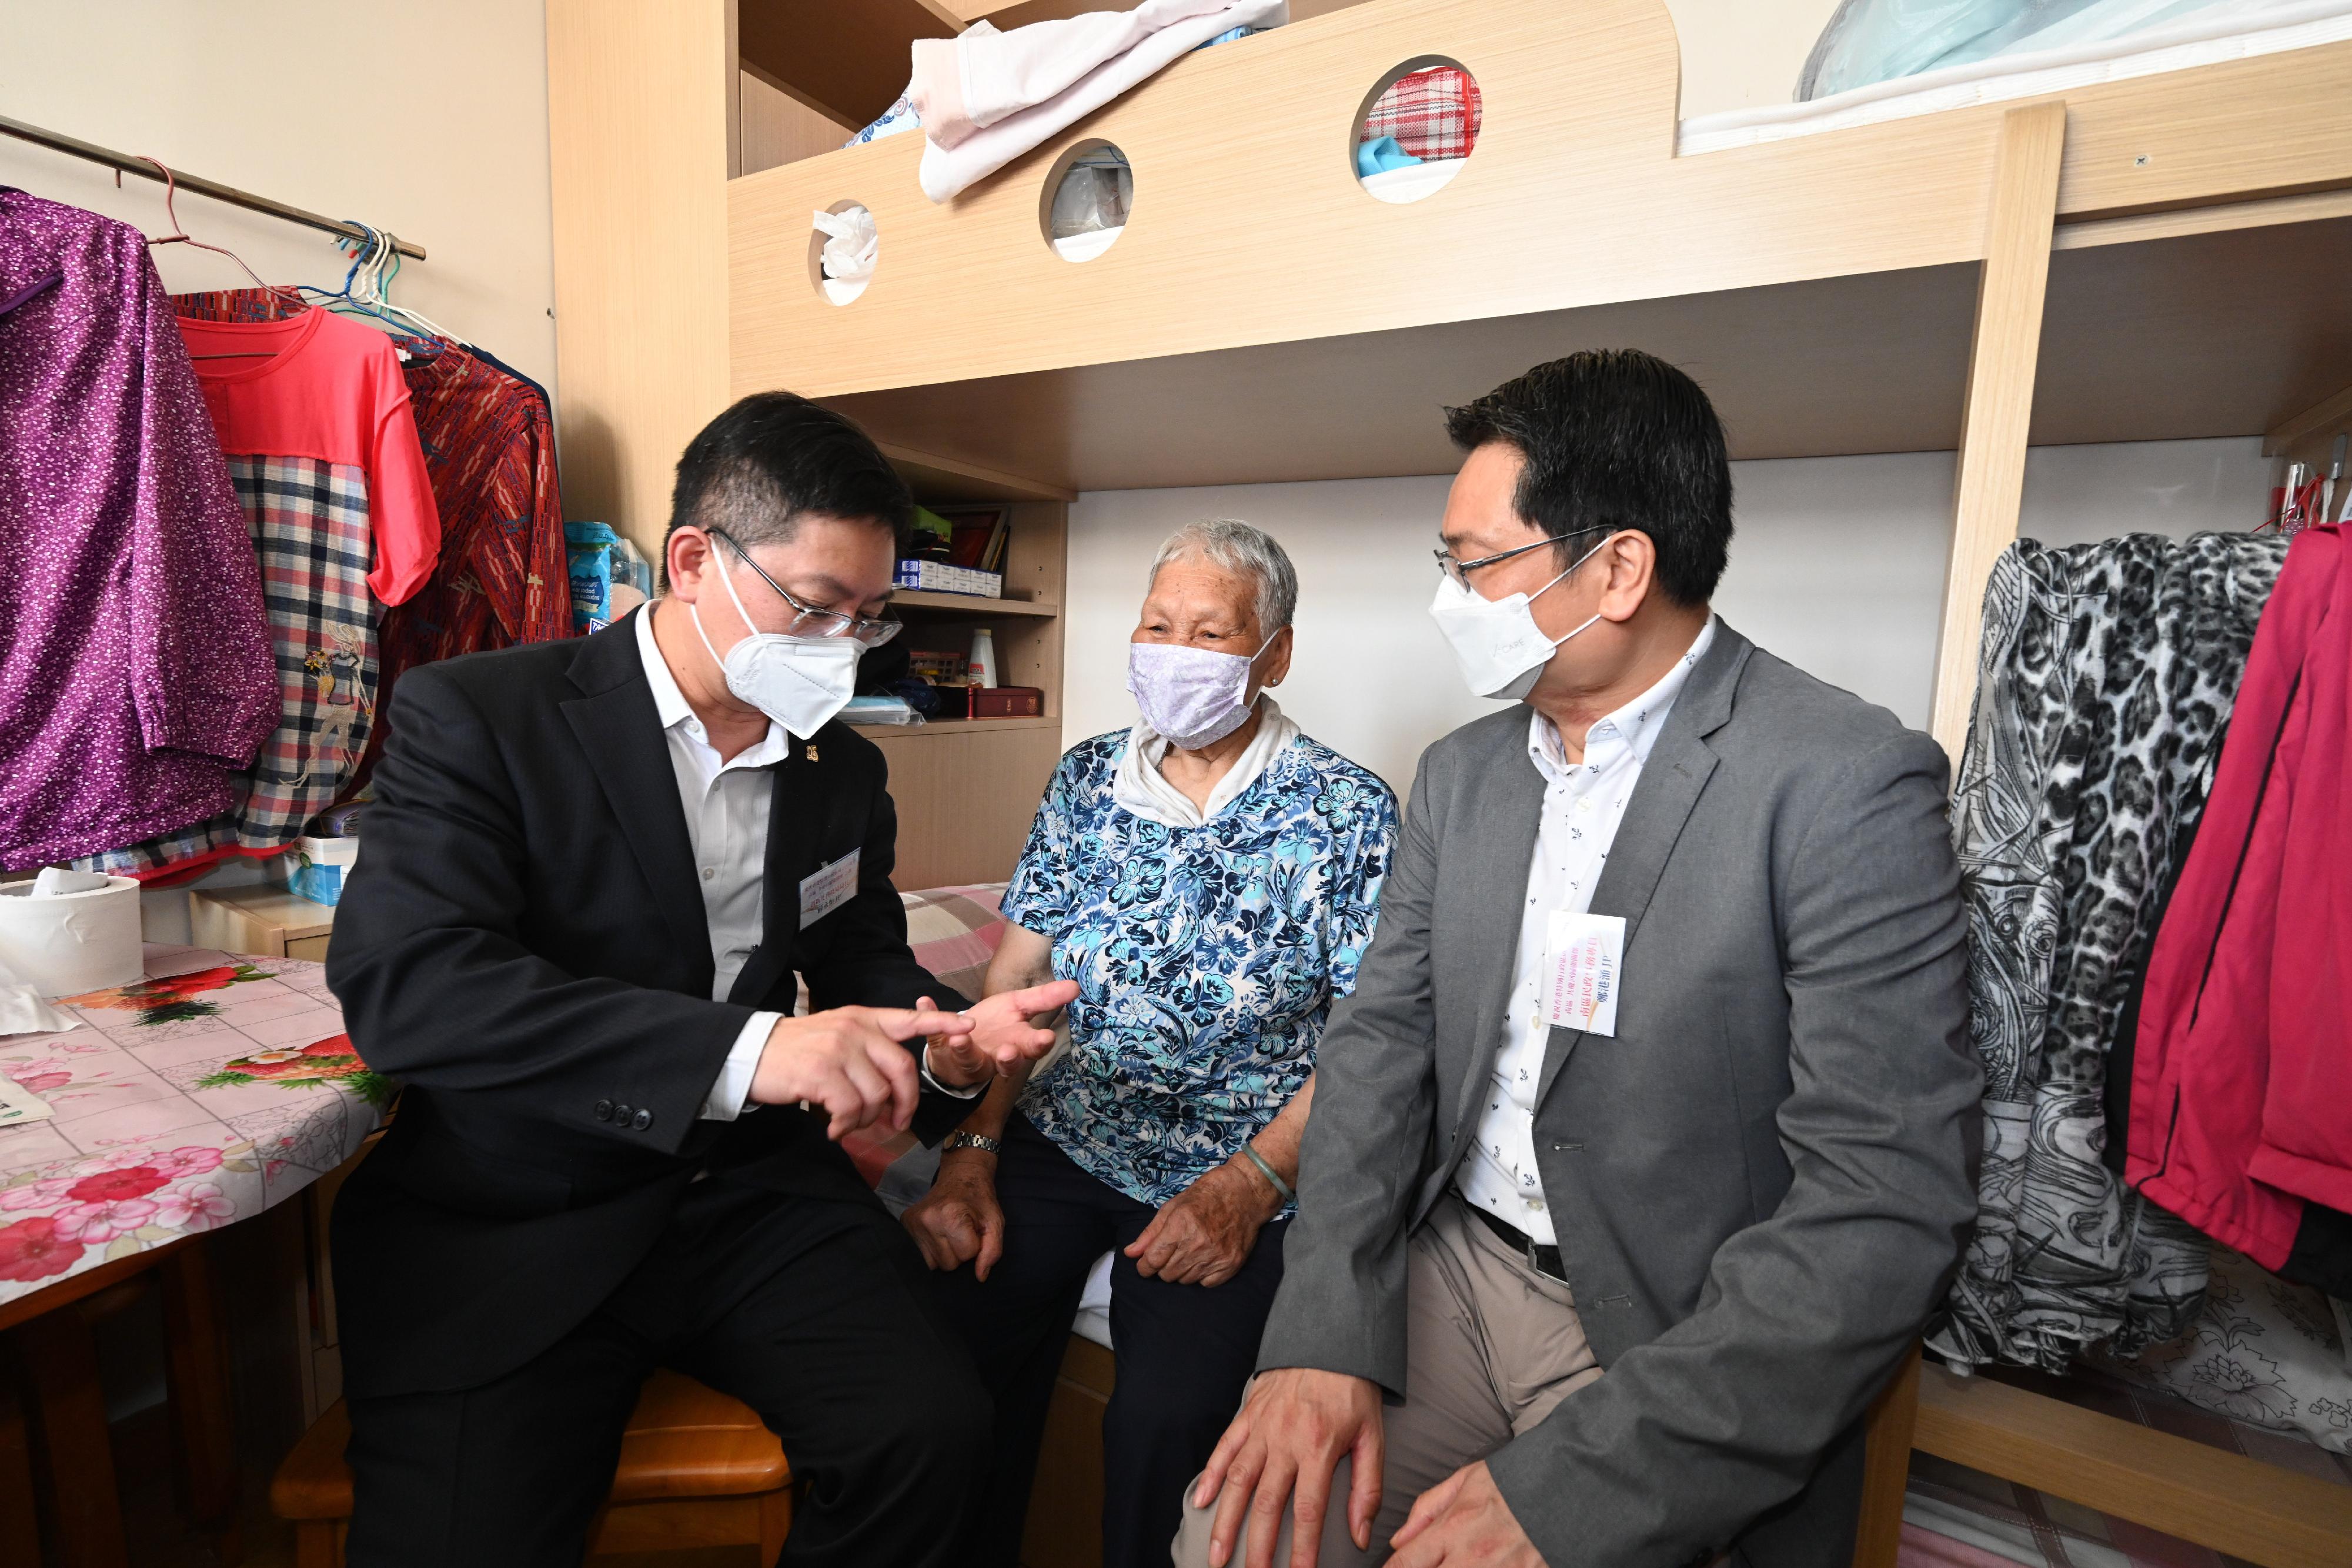 The Secretary for Innovation and Technology, Mr Alfred Sit (left), meets an elderly lady living alone in Shek Pai Wan Estate today (June 16) during his visit under the Celebrations for All project in Southern District. Looking on is the District Officer (Southern), Mr Francis Cheng (right).